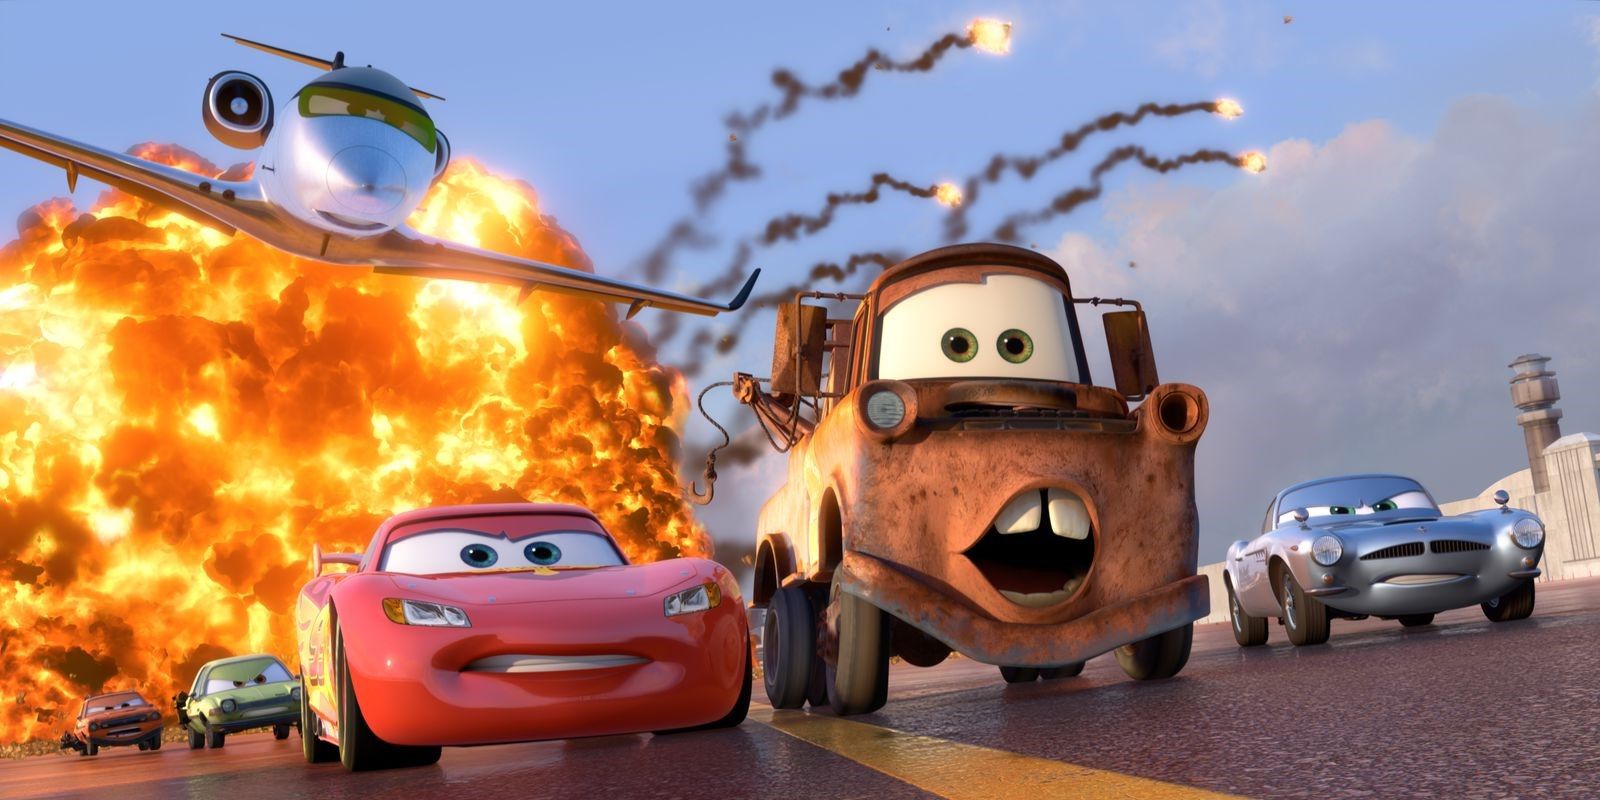 Pixar Movies Ranked From Worst to Best